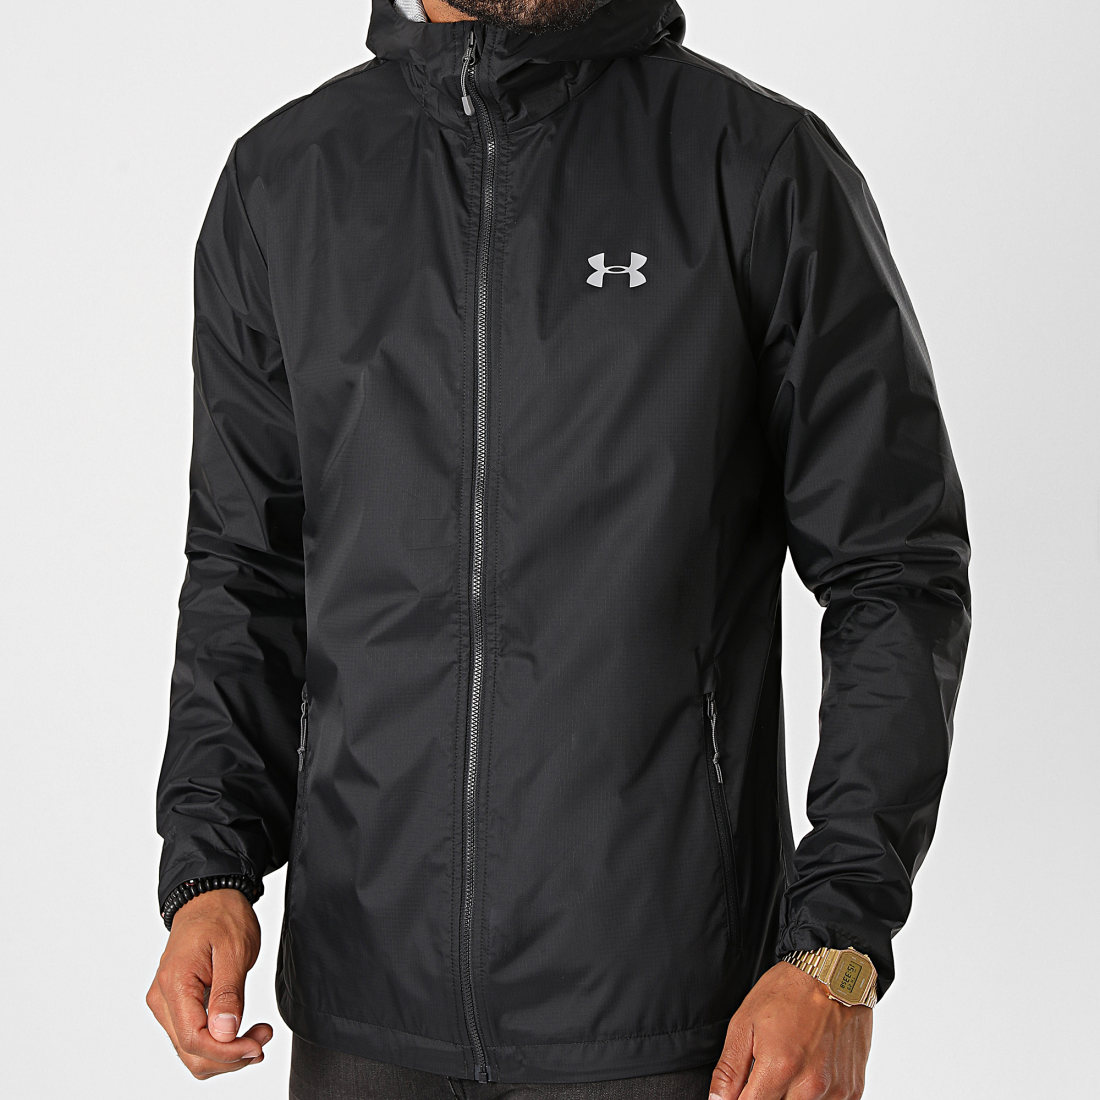 FIND - Veste/Kway Under Armour : r/FrenchReps